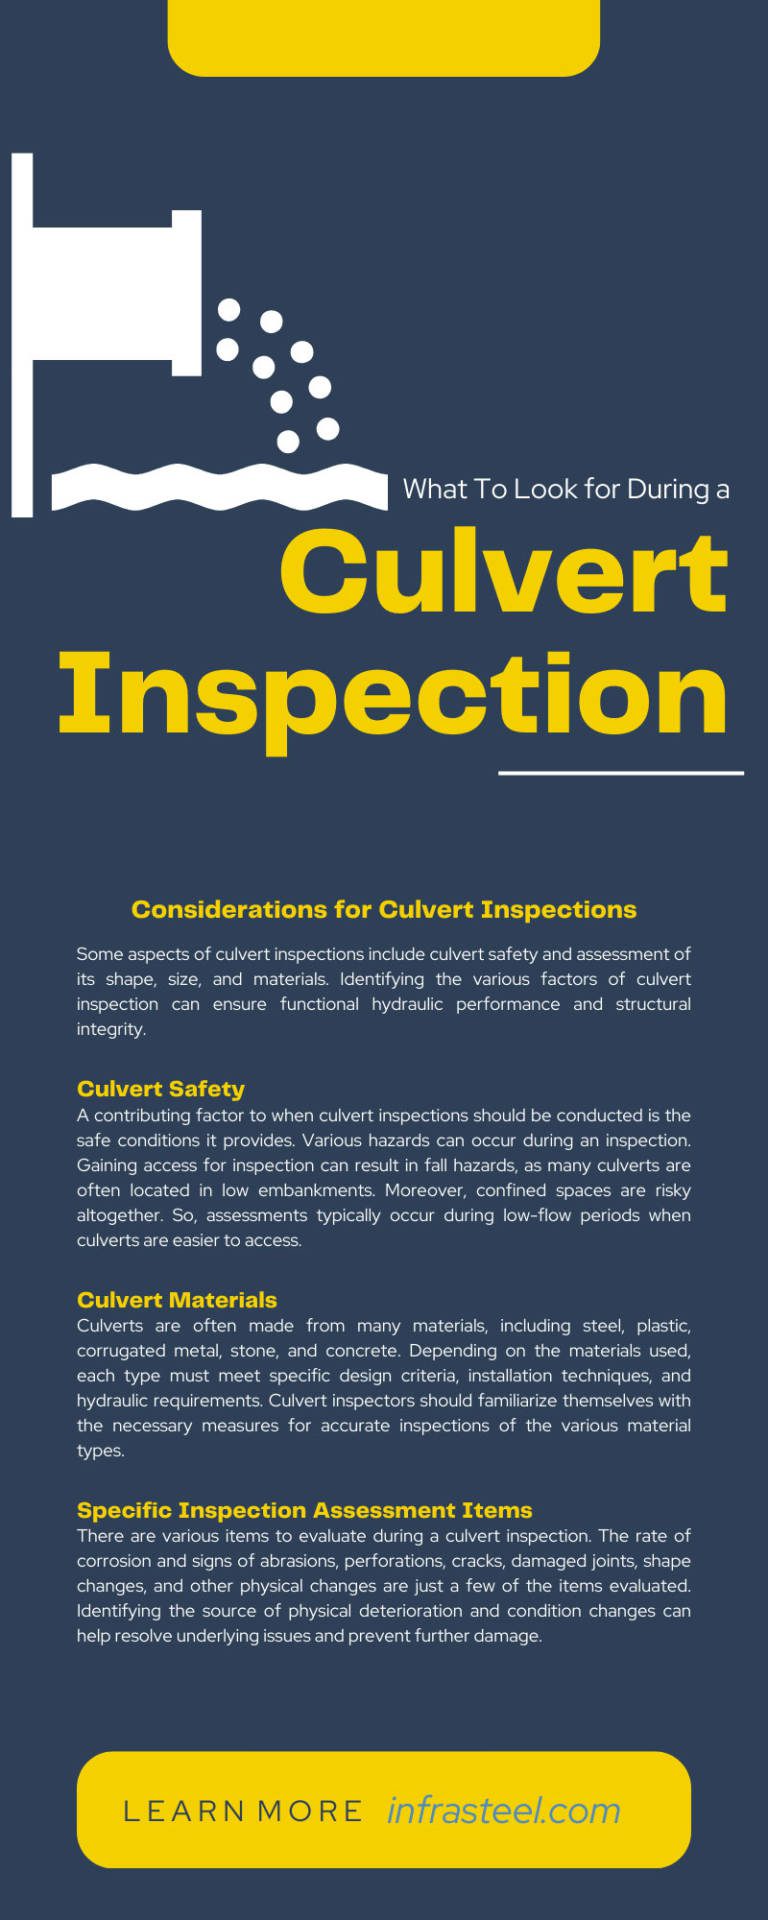 What To Look for During a Culvert Inspection